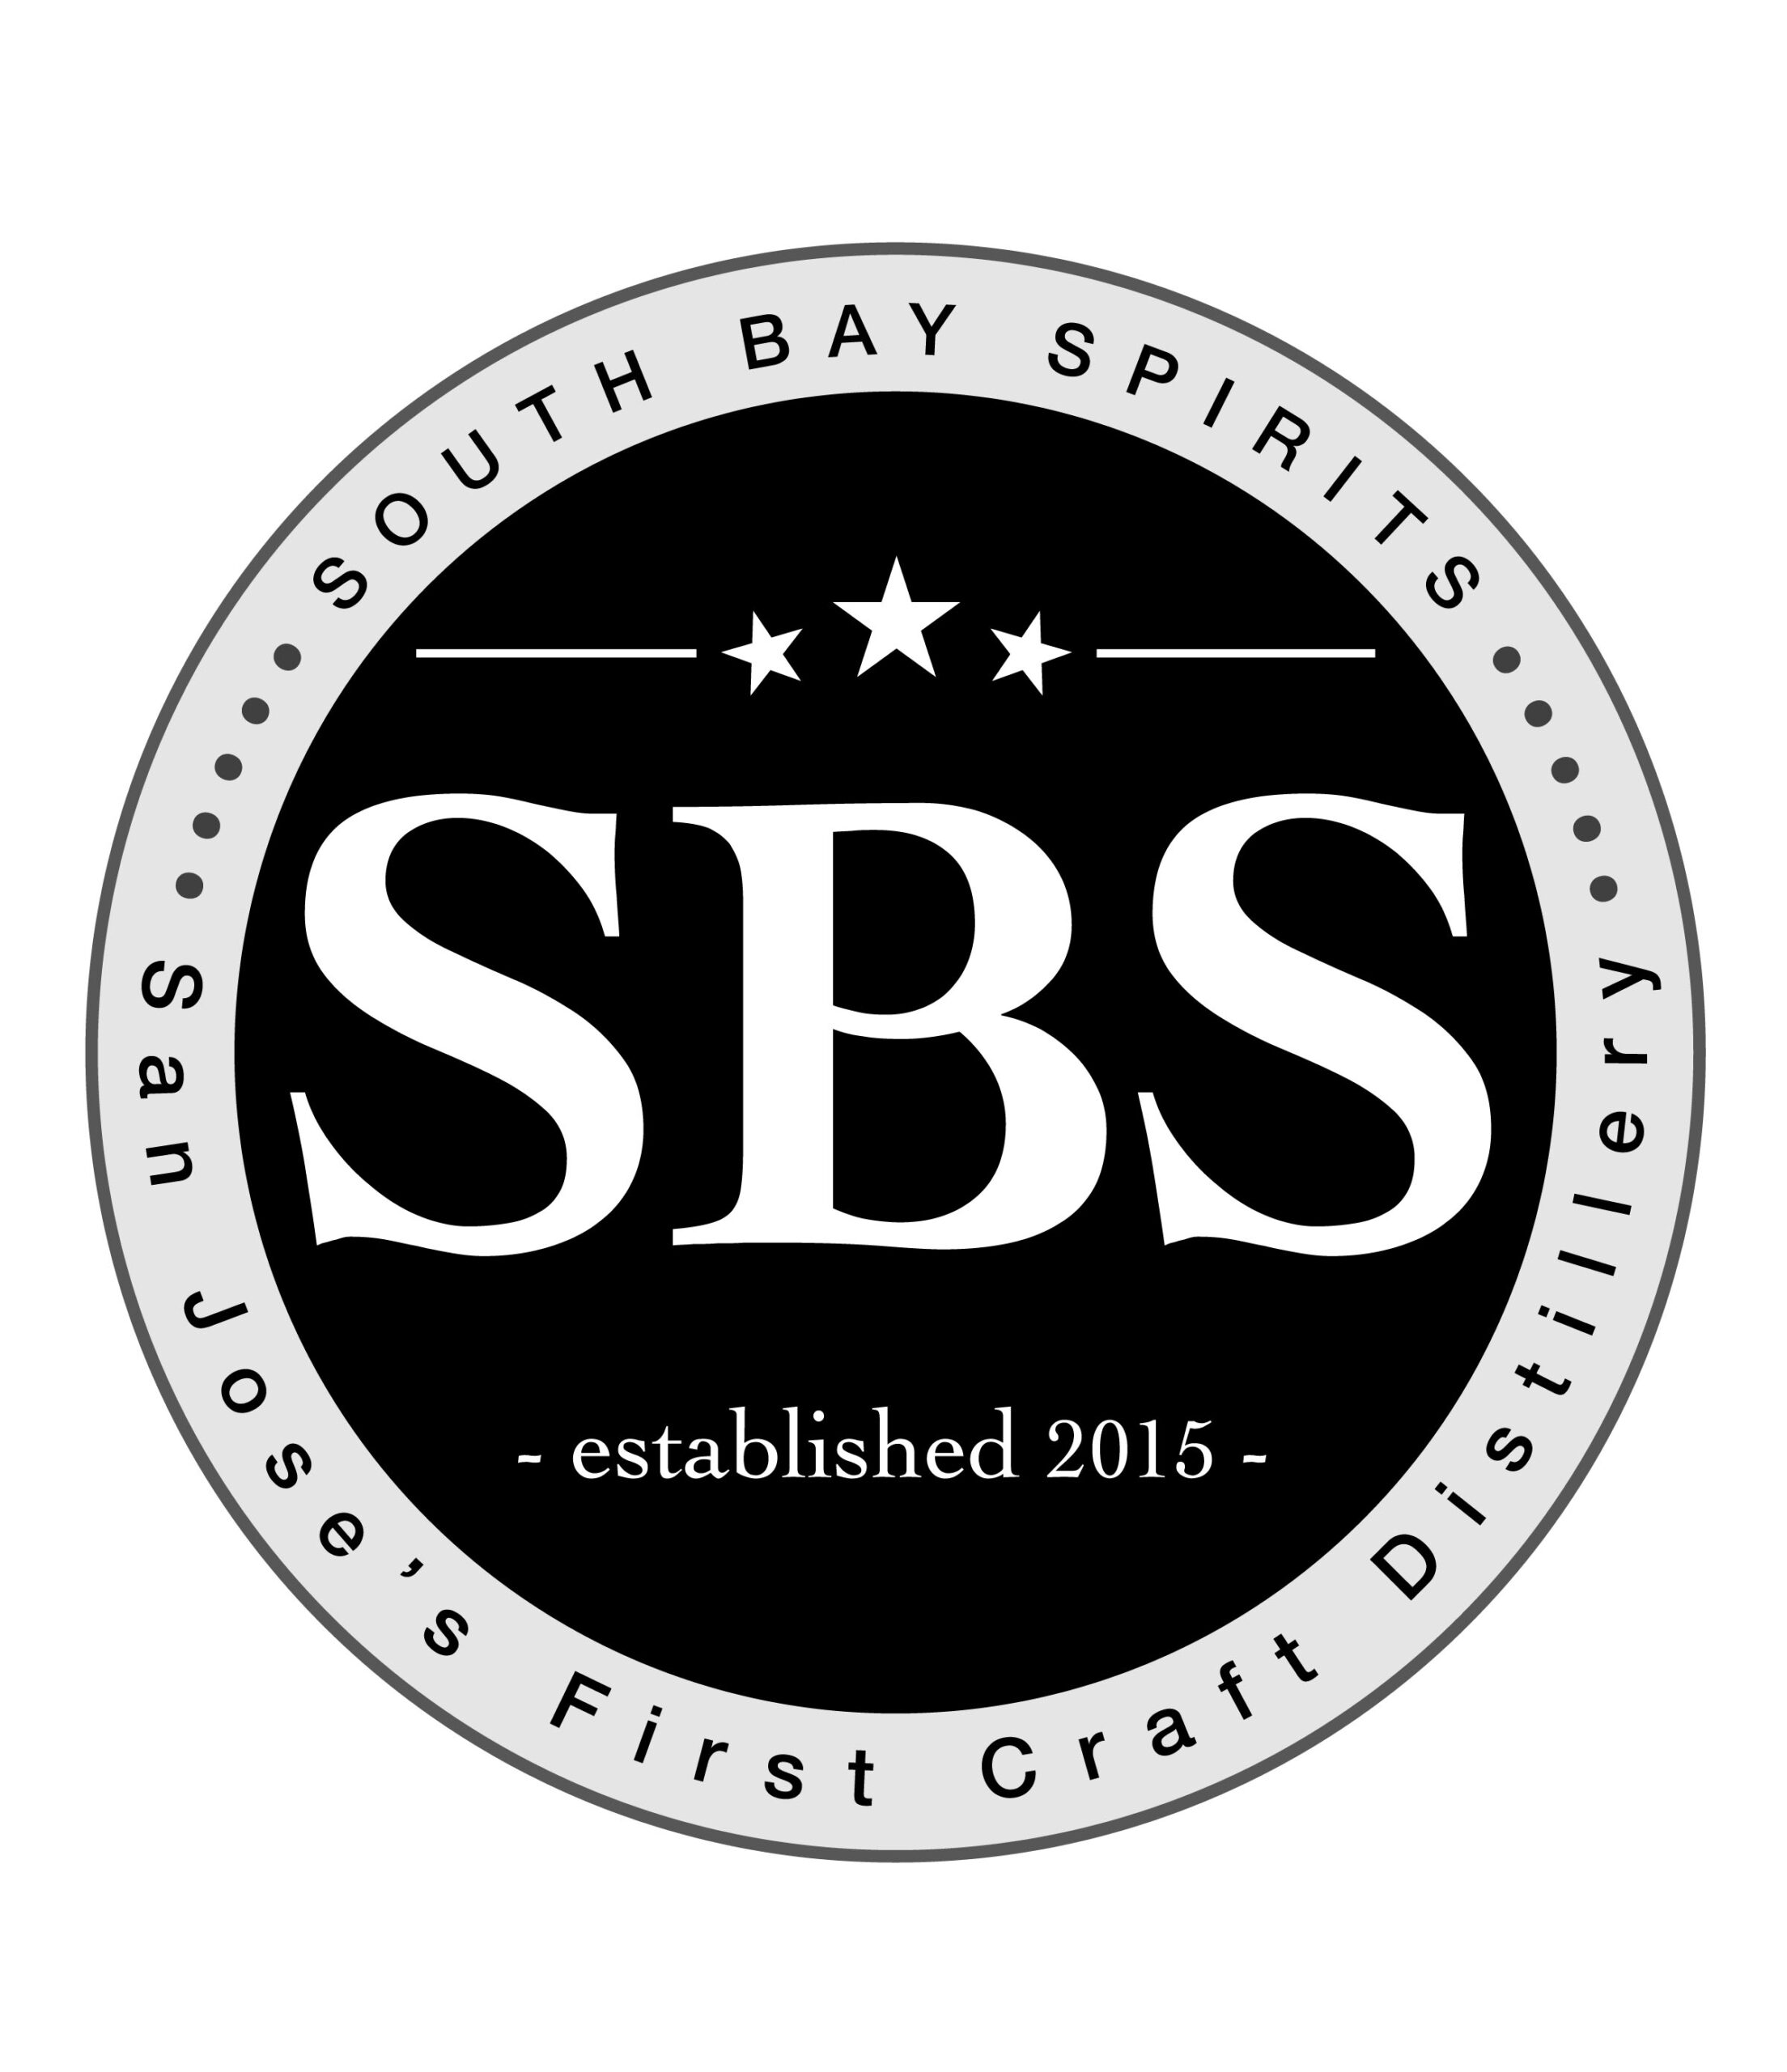 sbs_LOGO_version_final_approved_by_eric_